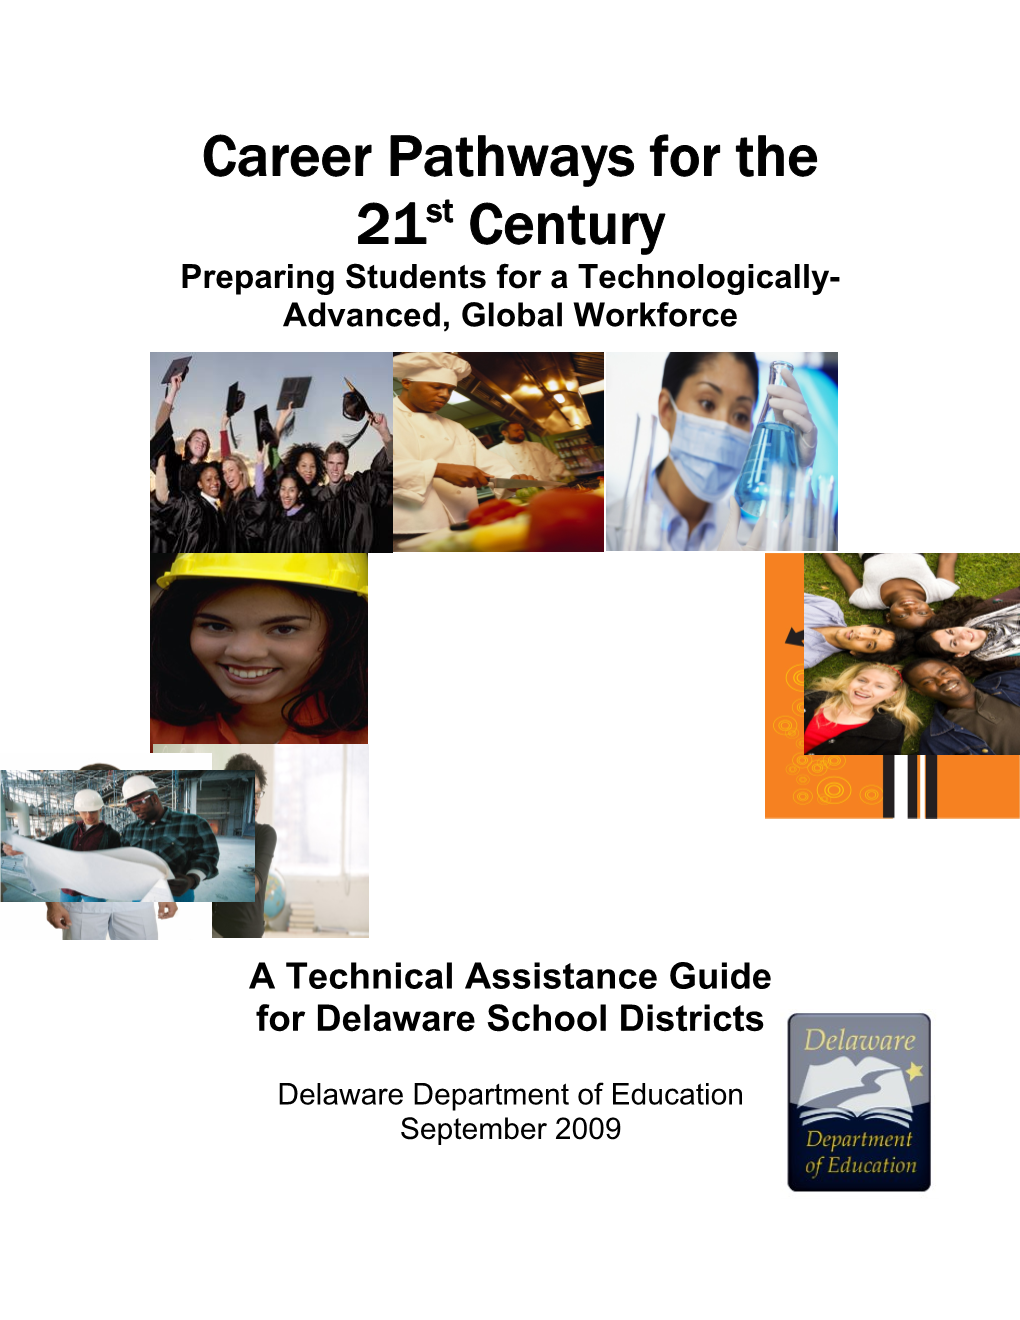 Career Pathways for the 21St Century